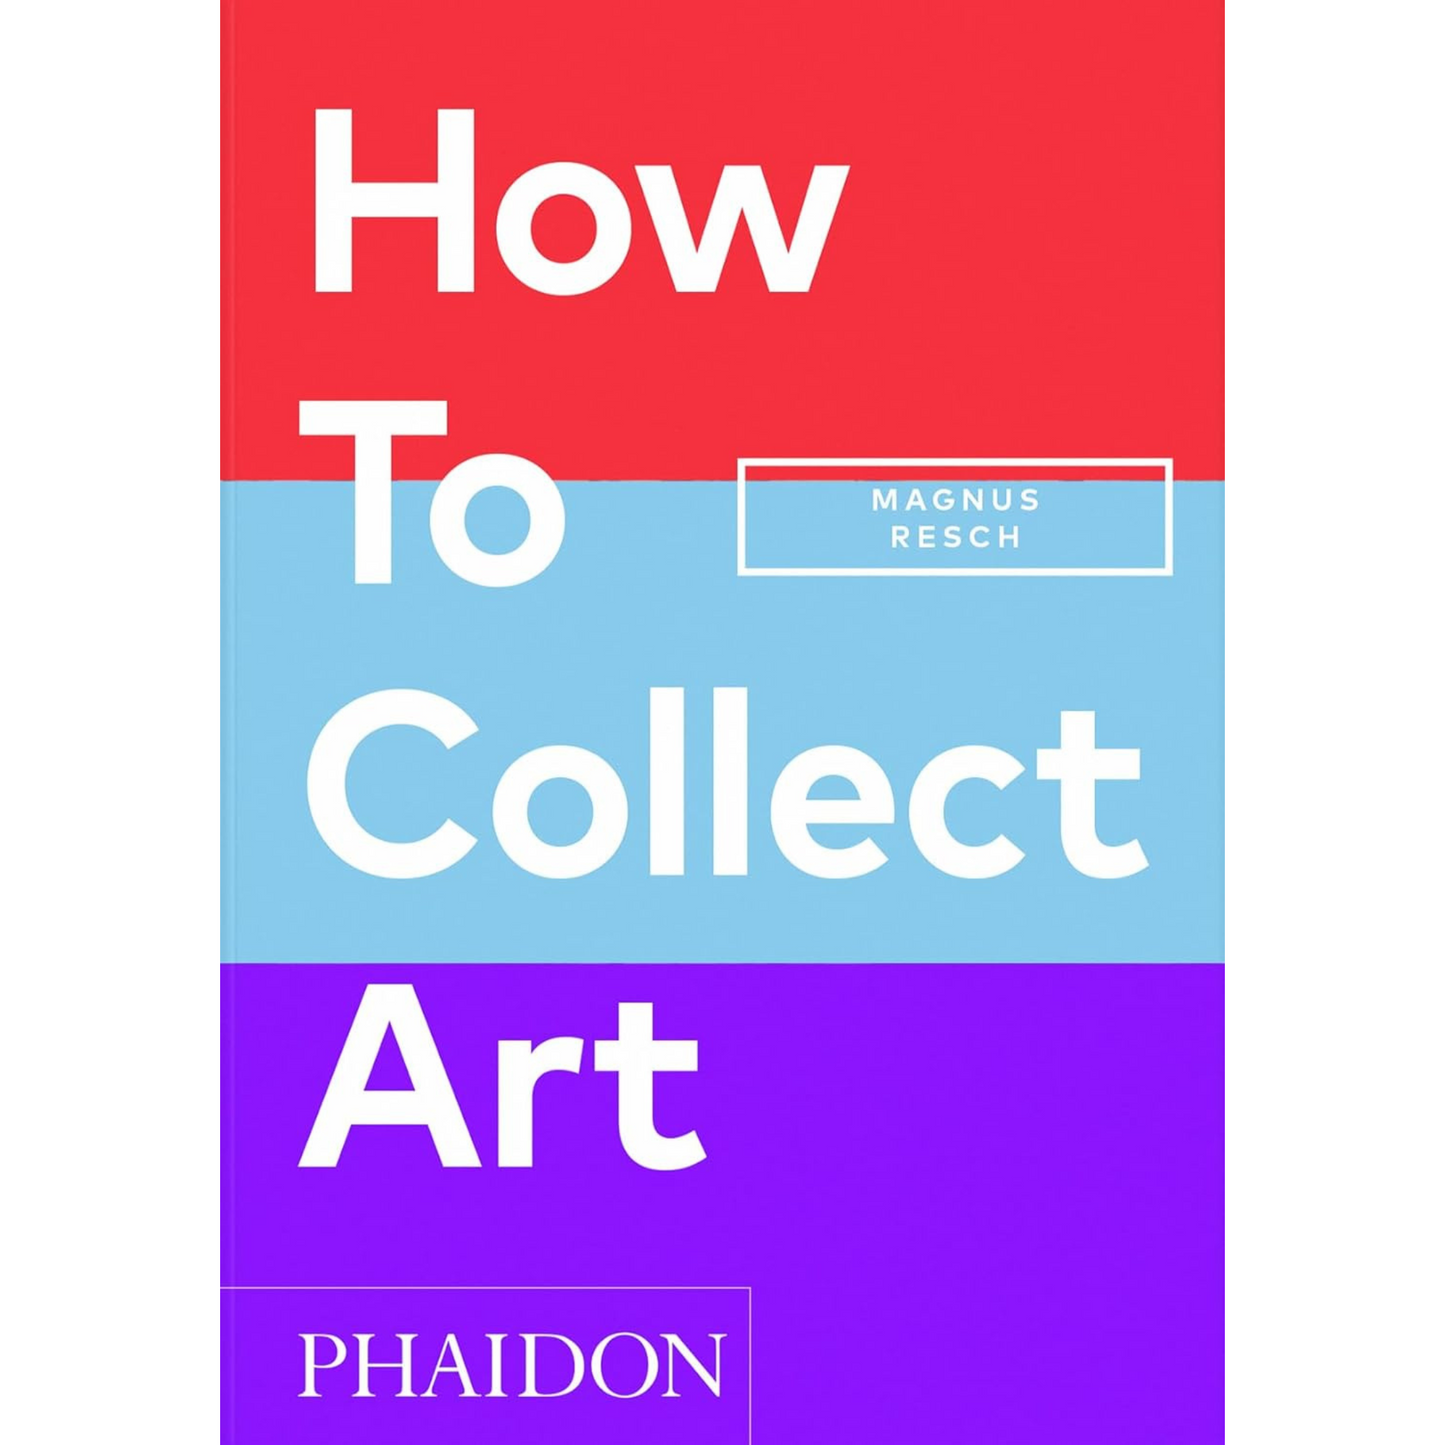 Colourful red, turquoise and purple cover for How to Collect Art. 